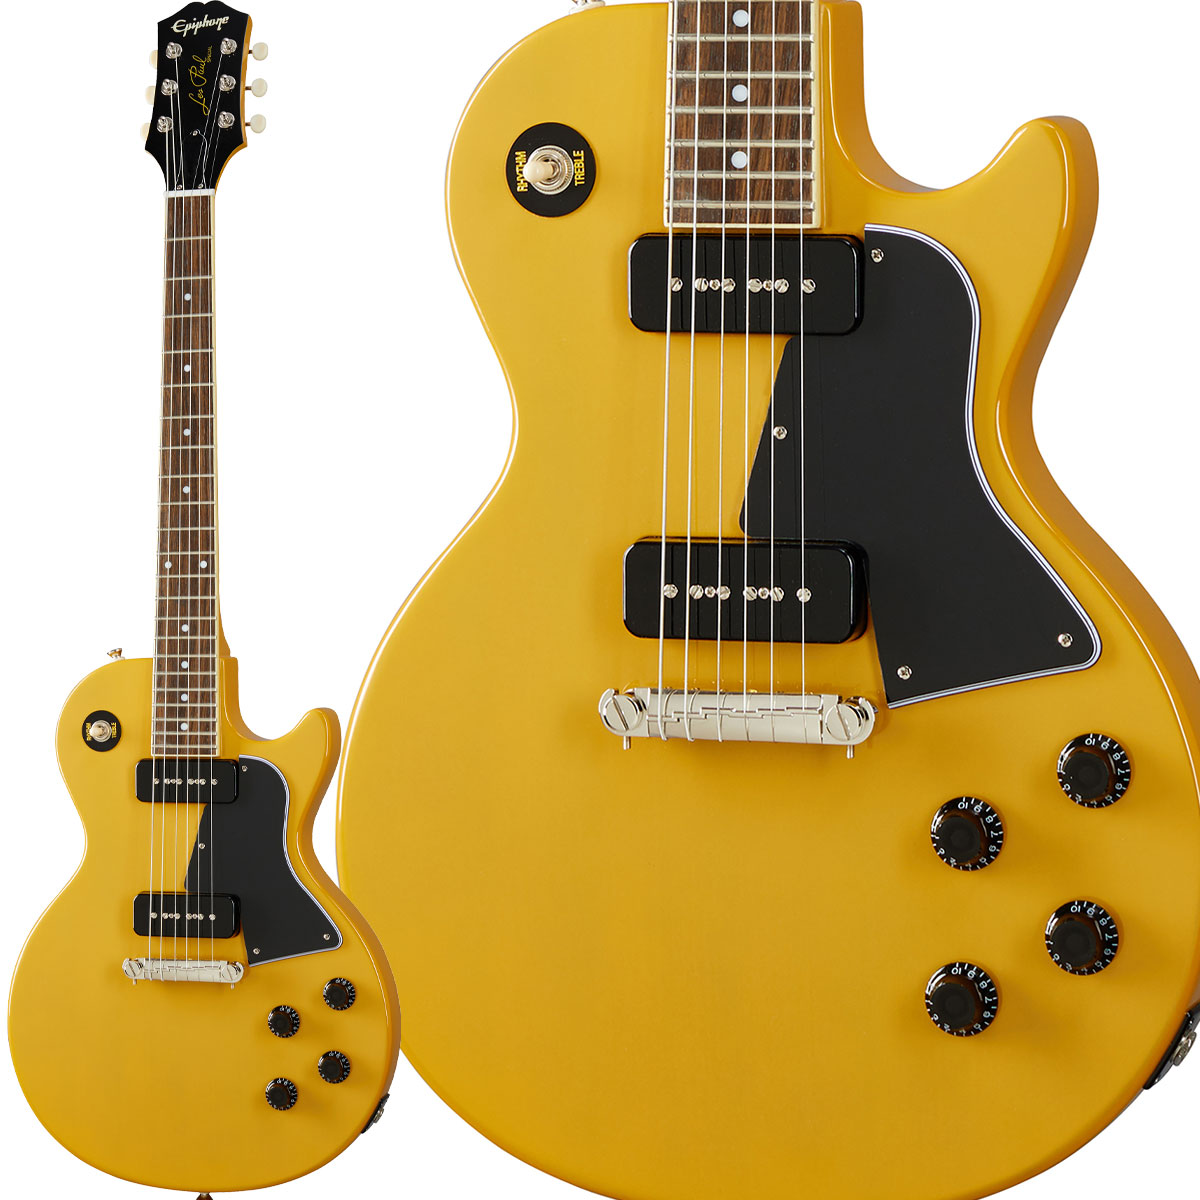 Gibson Les Paul Special ギブソン レスポールスペシャルギター